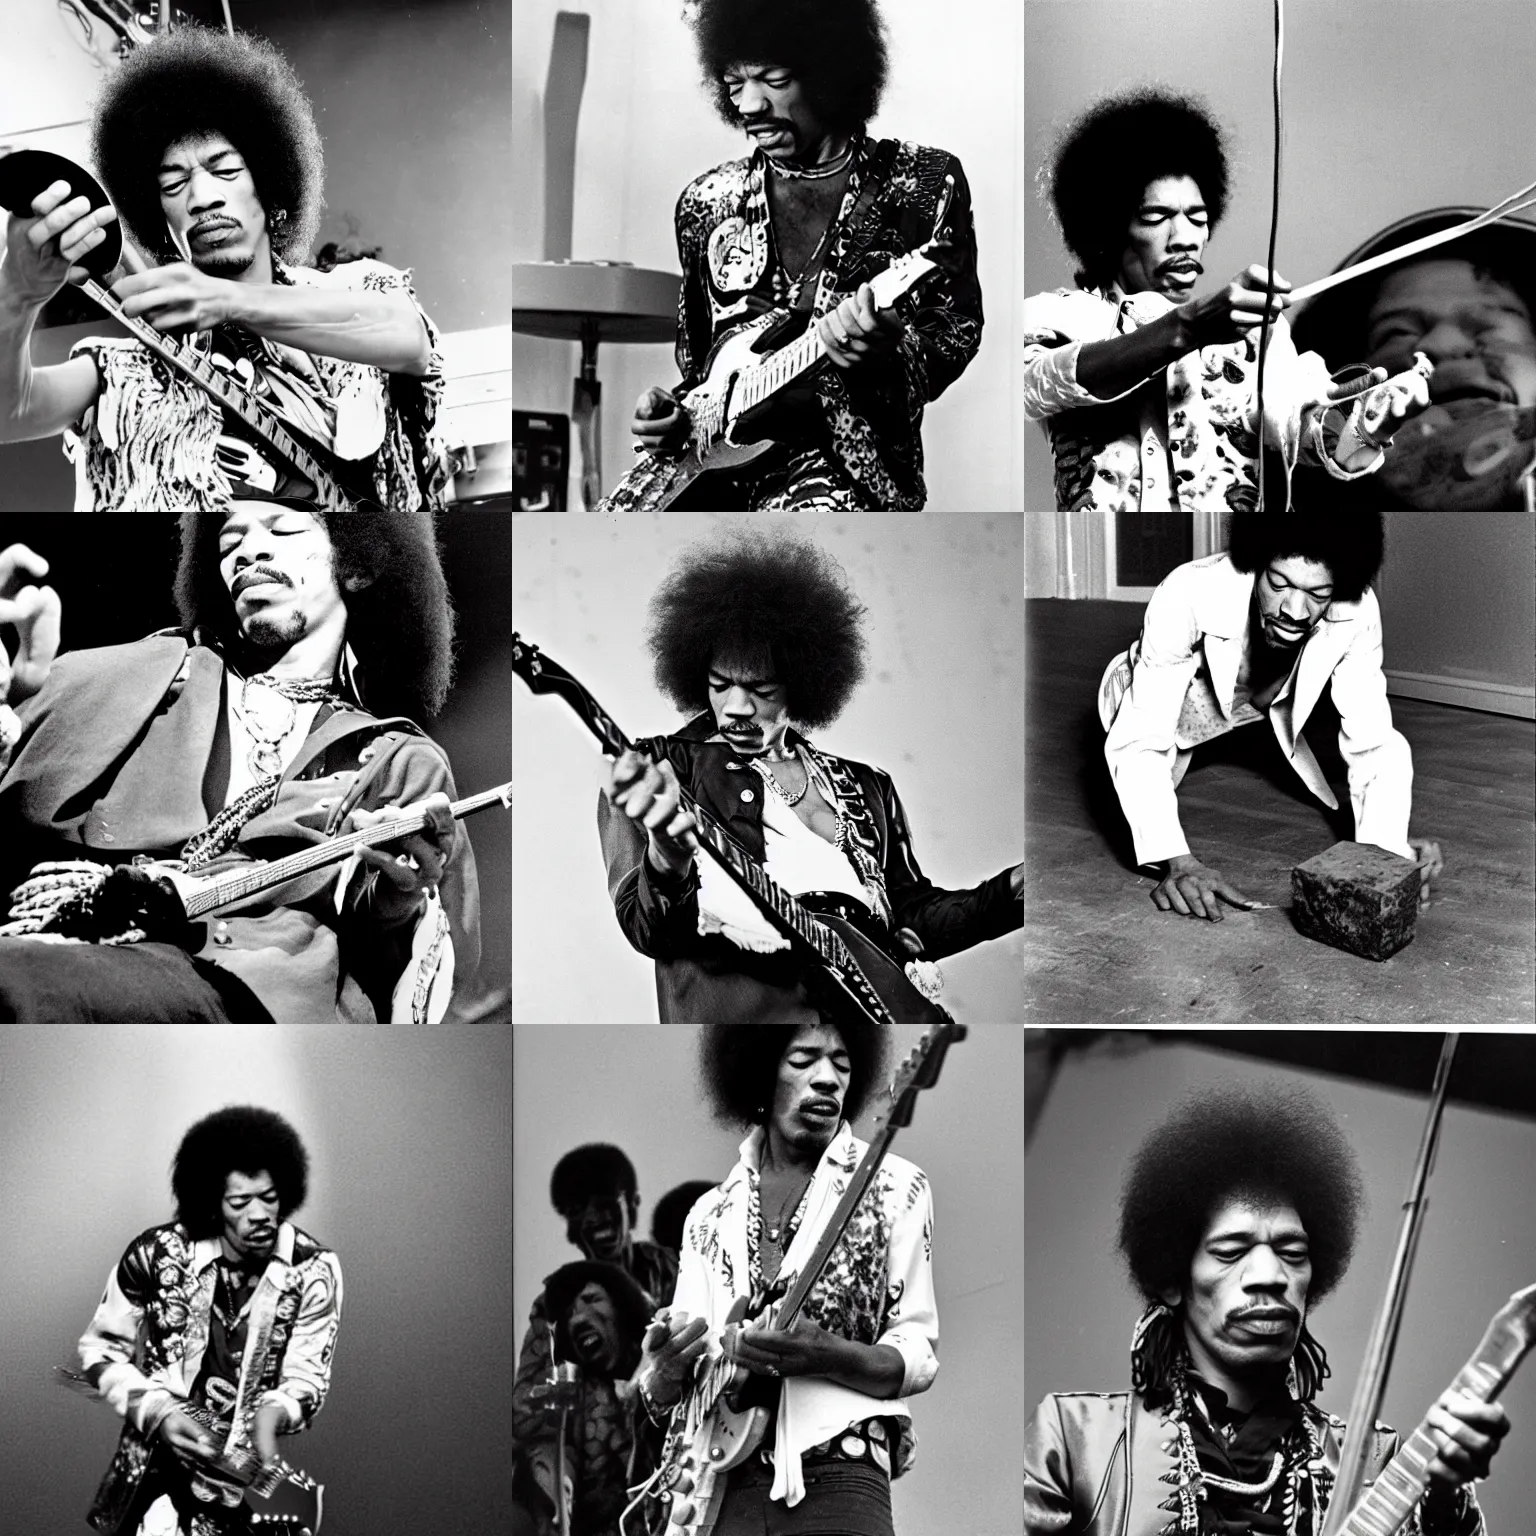 Prompt: jimi hendrix picking up a small object from the floor